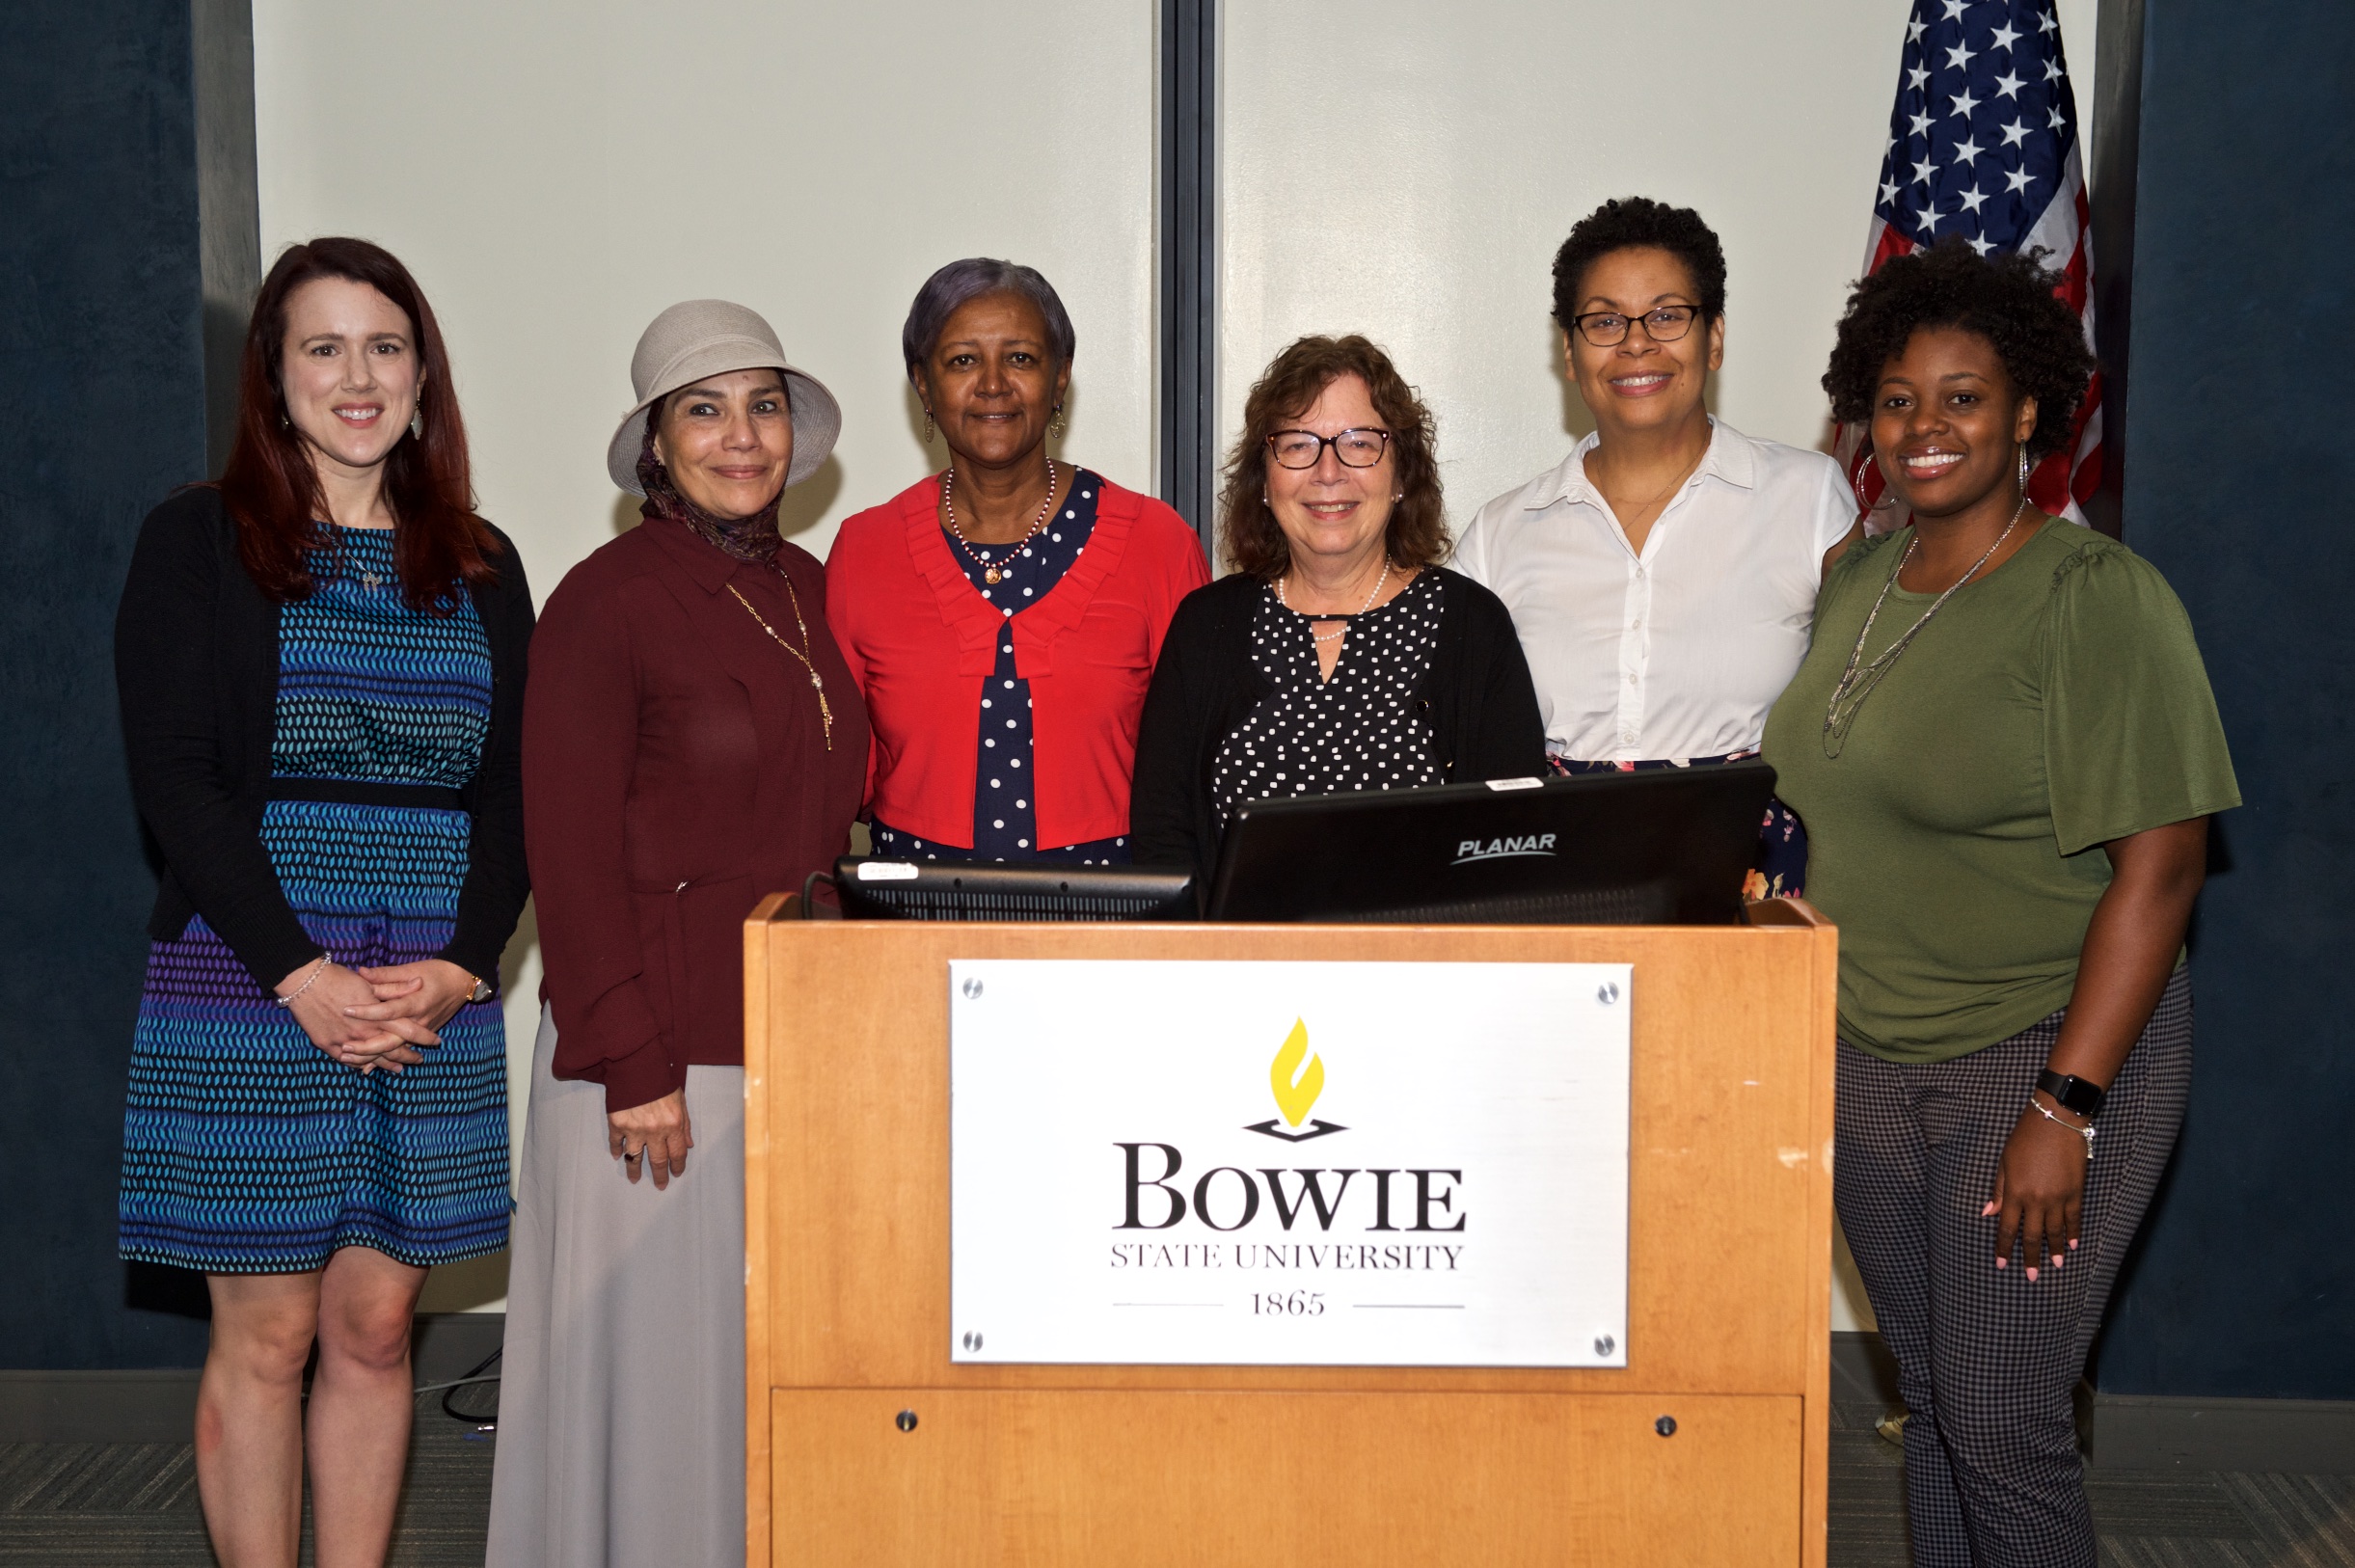 Portrait of the first cohort of CETL Fellows standing behind a Bowie State University podium